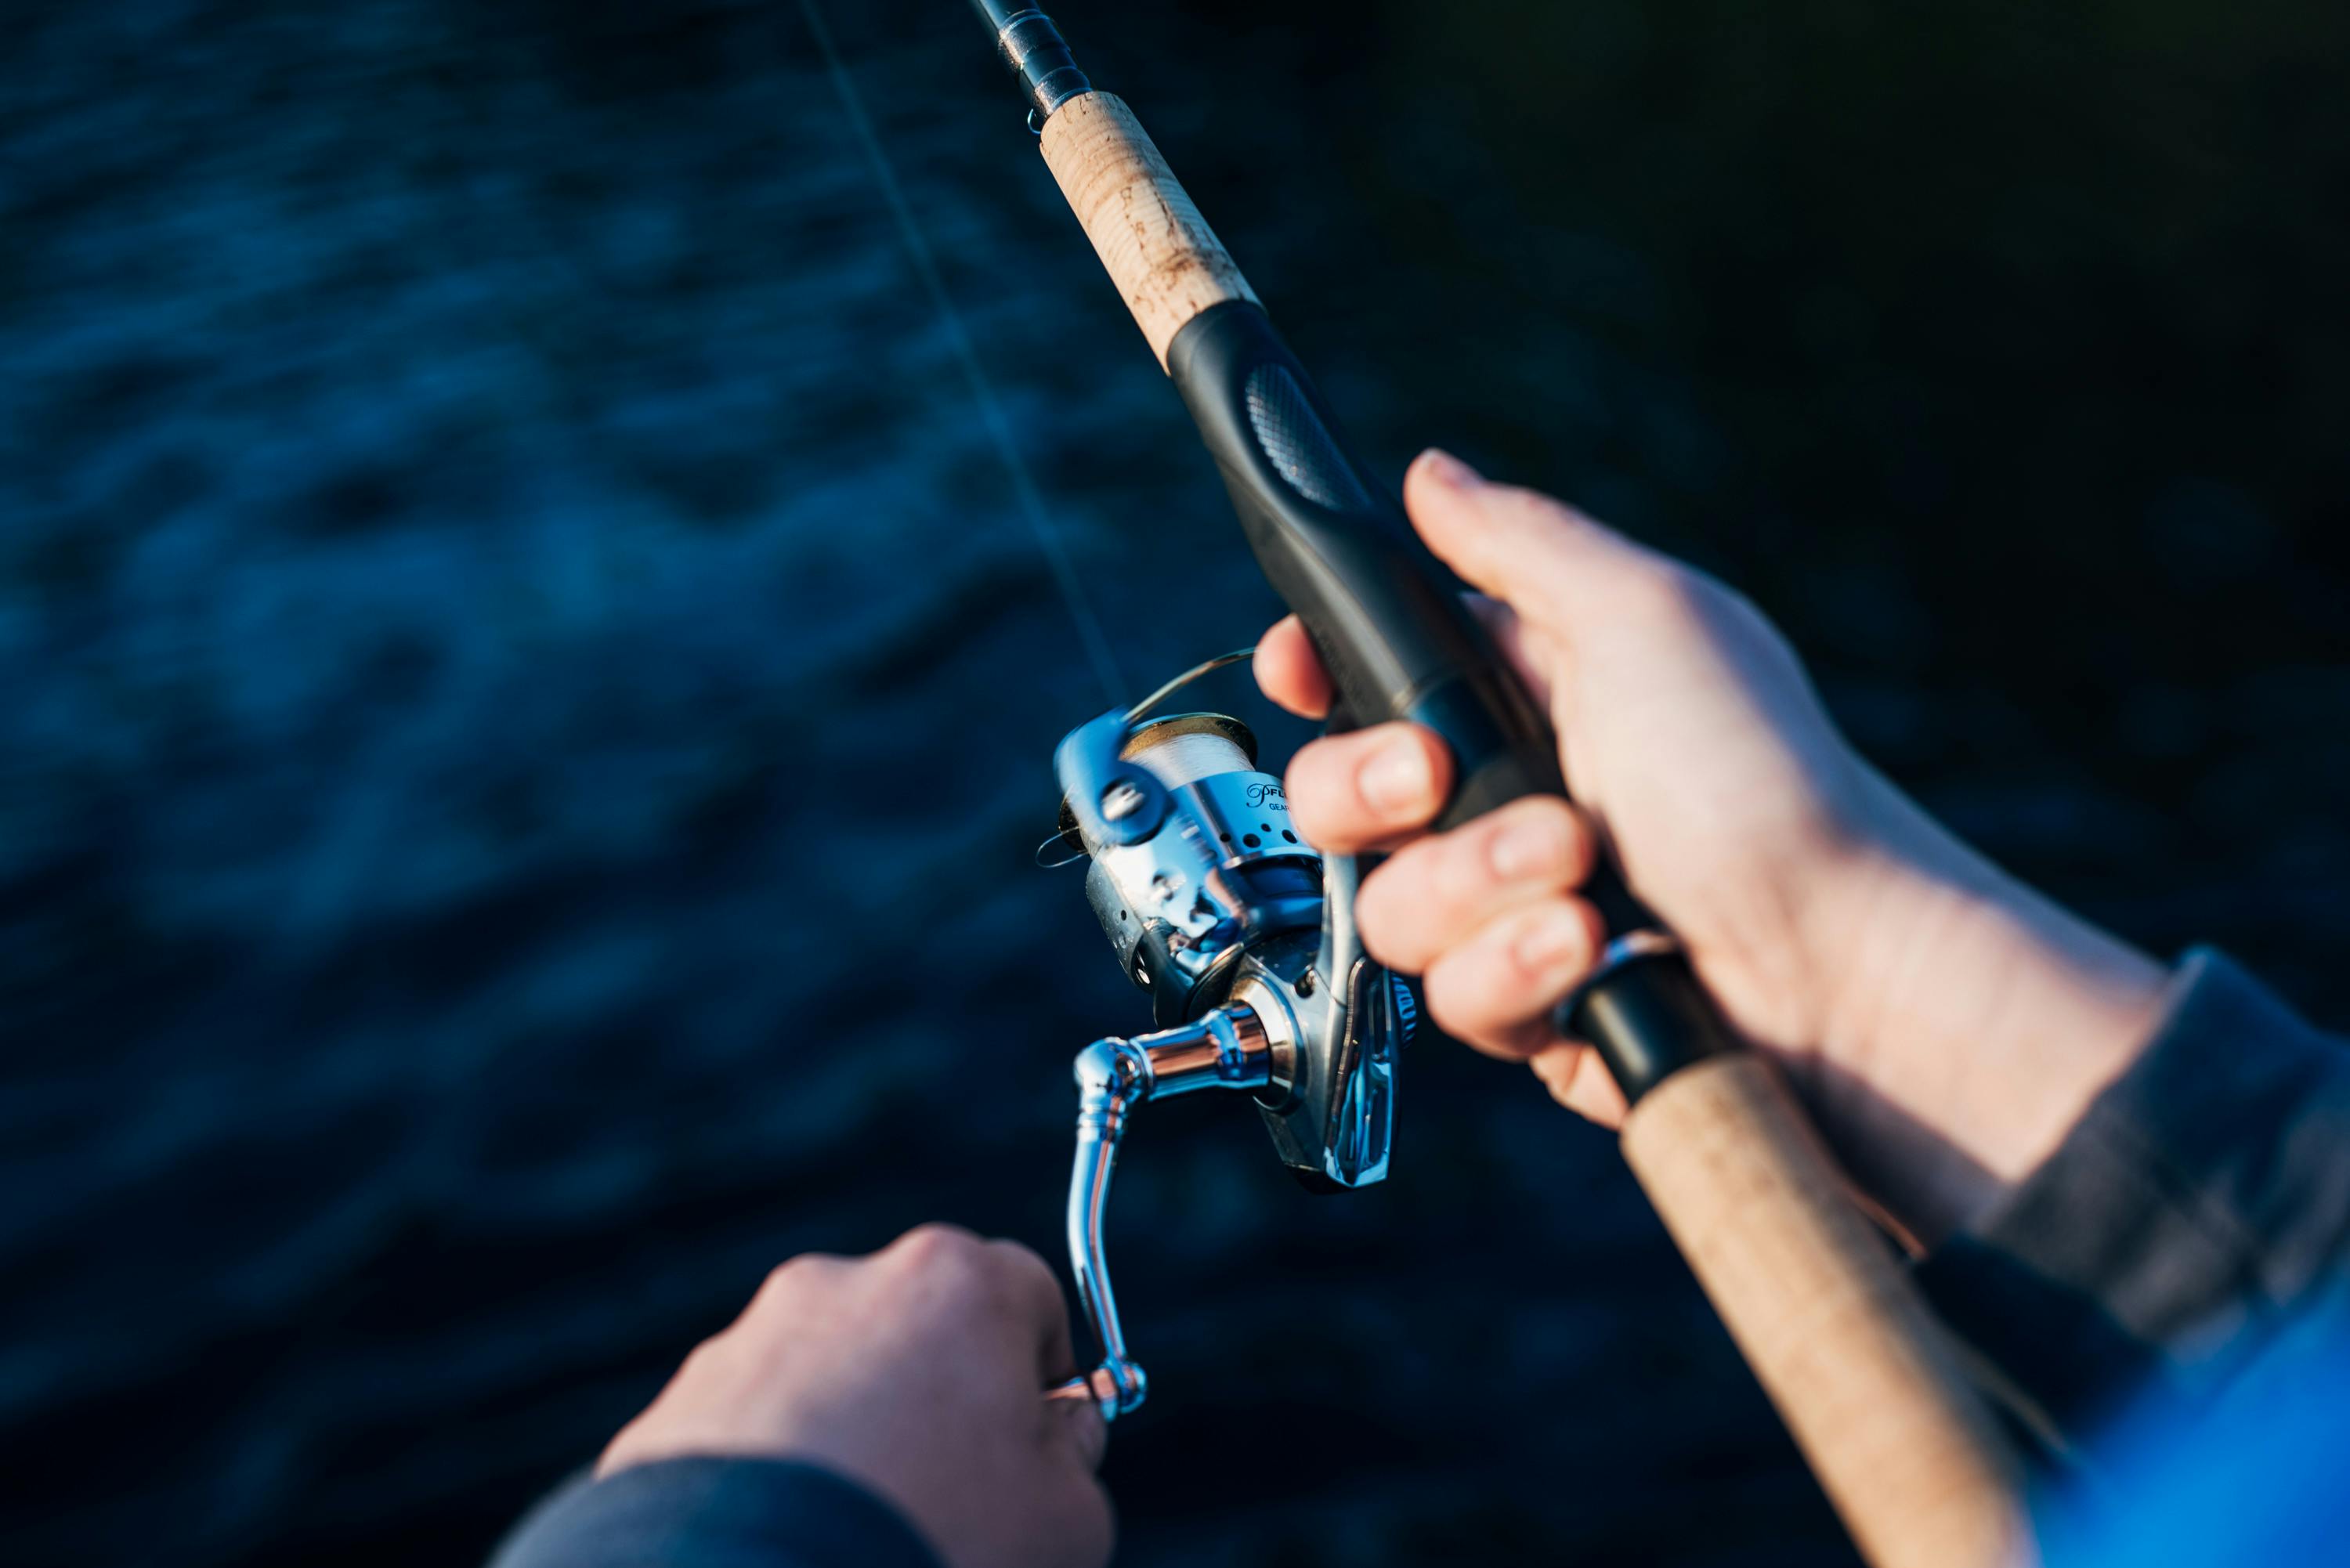 Fishing Rod Photos, Download The BEST Free Fishing Rod Stock